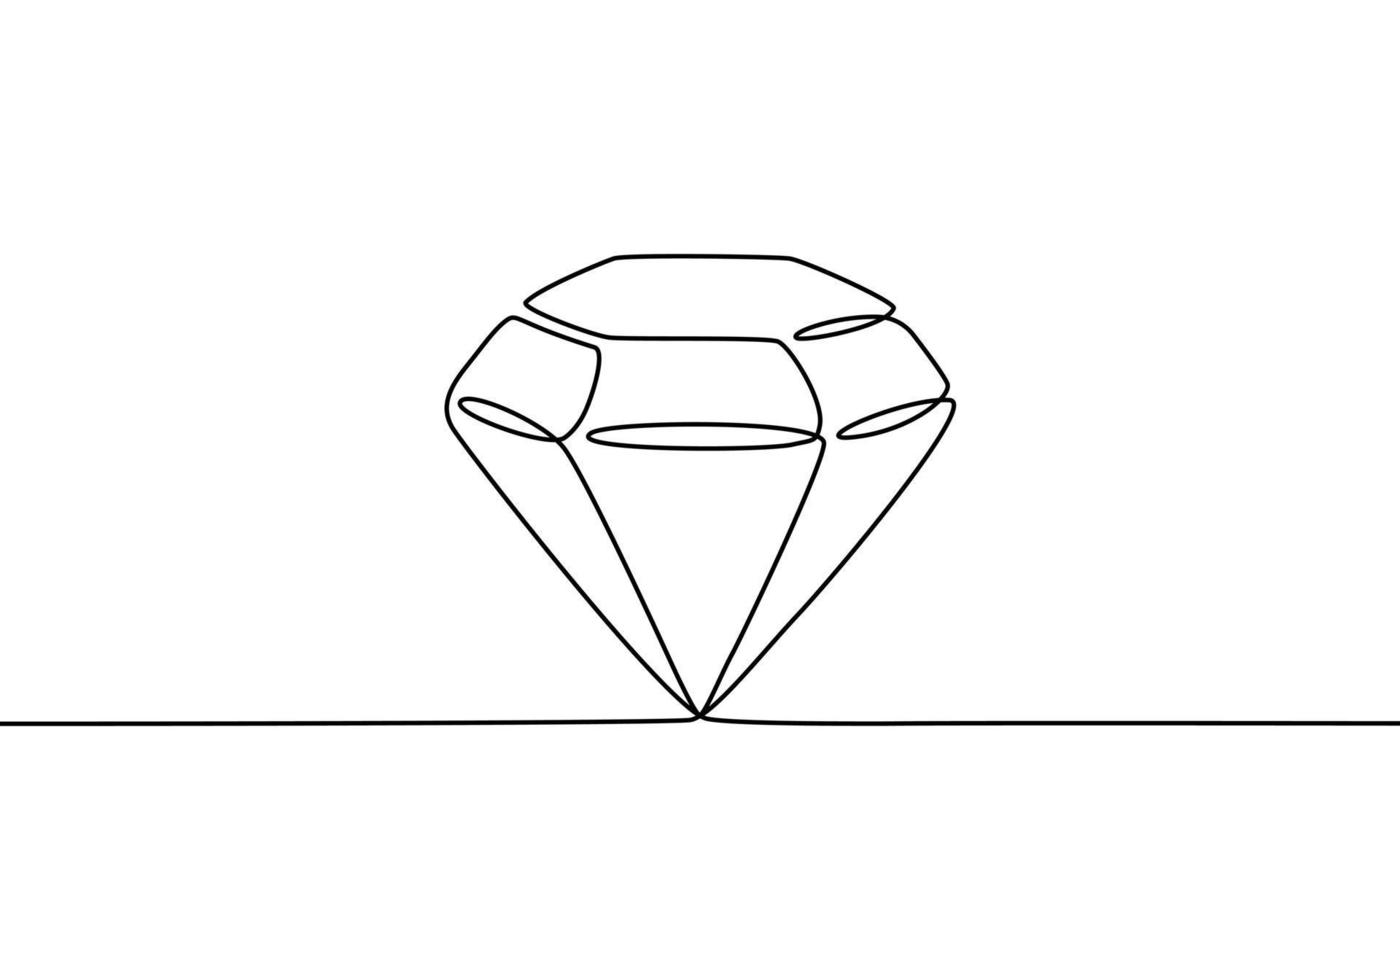 Diamond one line drawing. Gem symbol continuous line illustration isolated on white background. vector